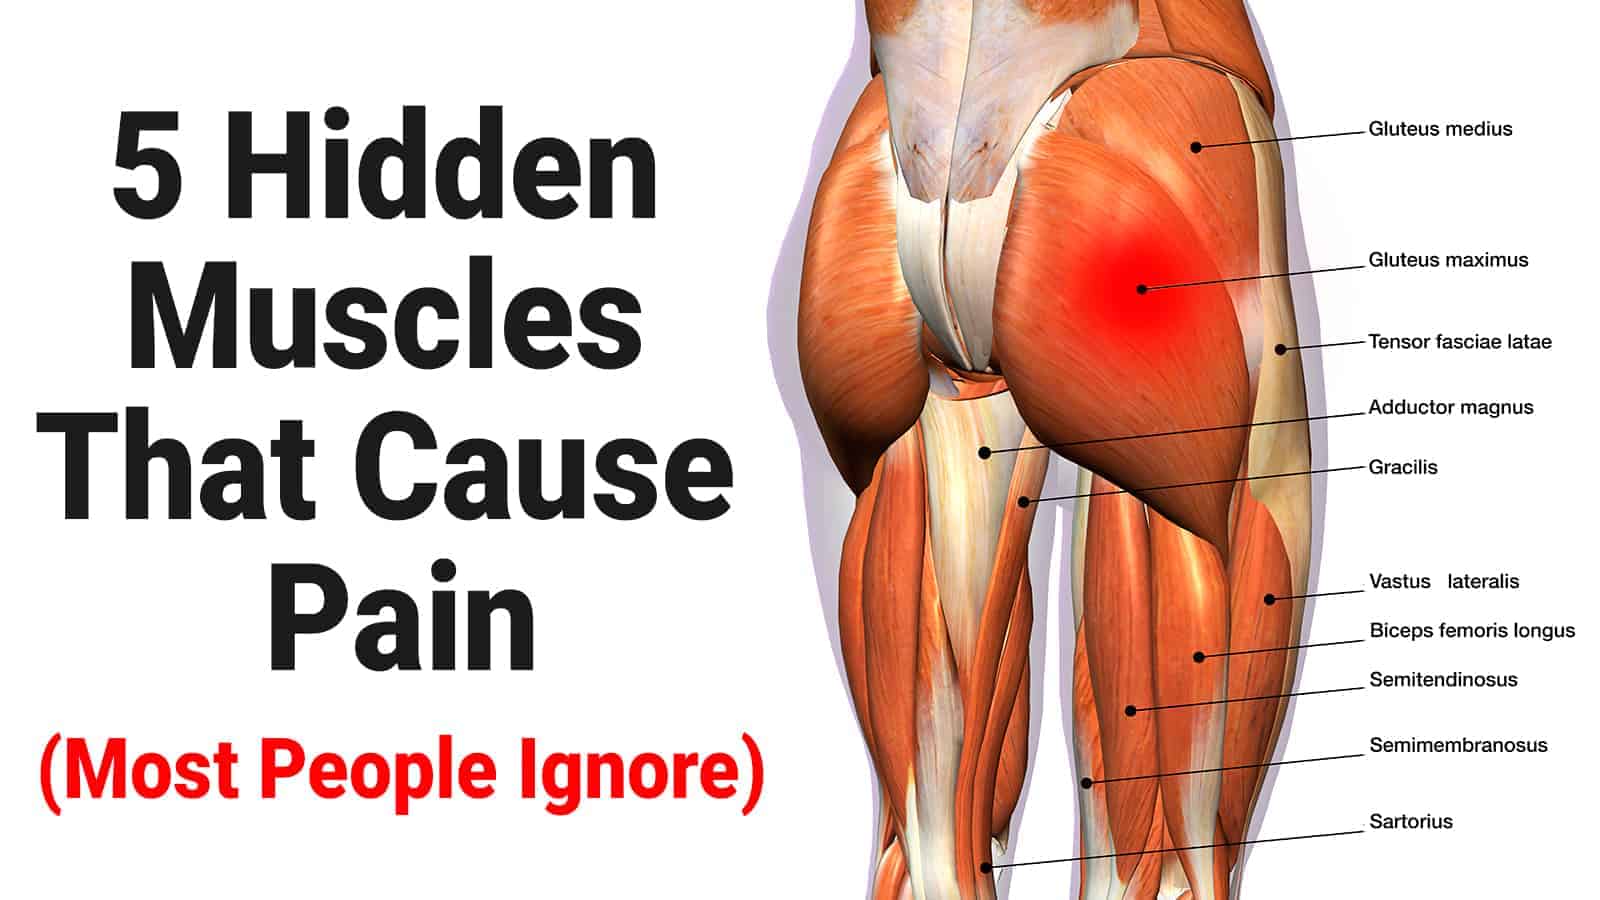 5 Hidden Muscles That Cause Pain (Most People Ignore)